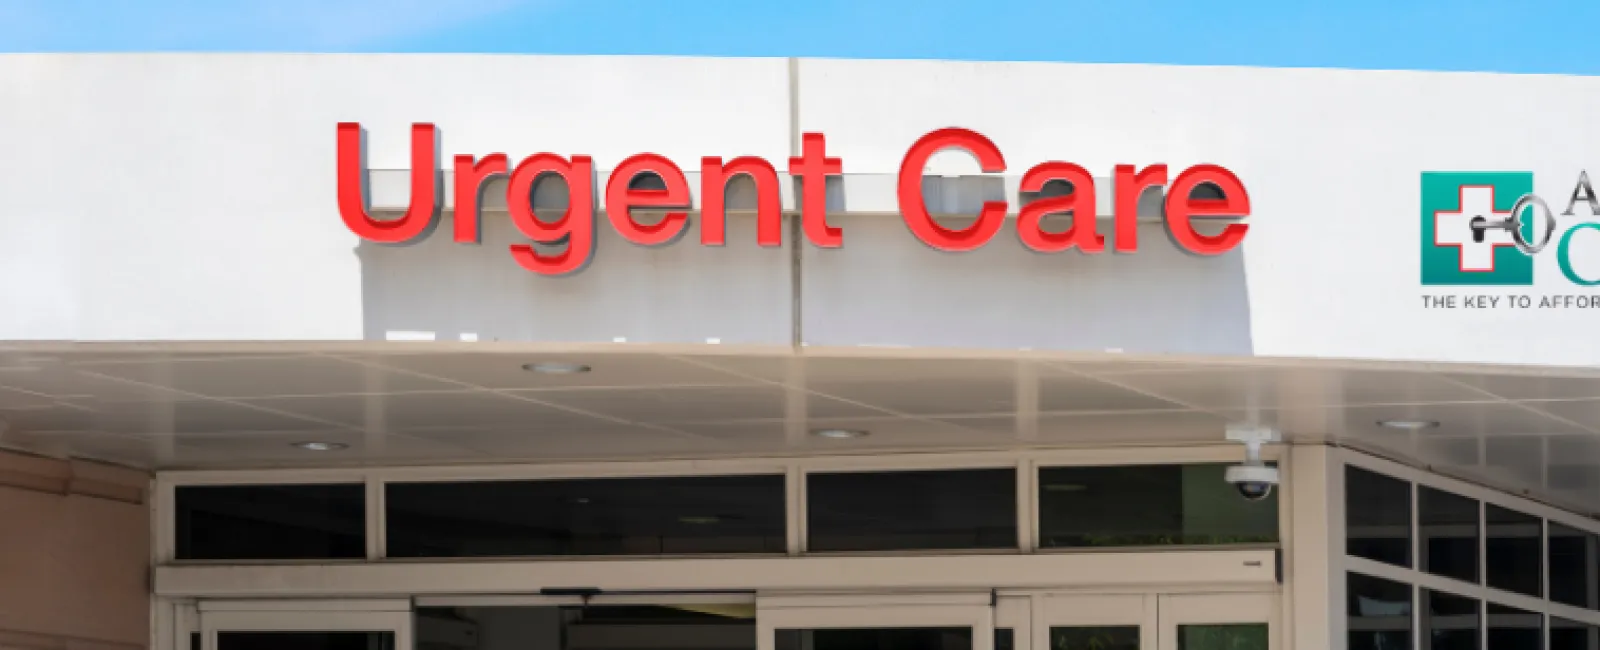 Urgent Care is Expensive, How Can AccessOPEN Help?